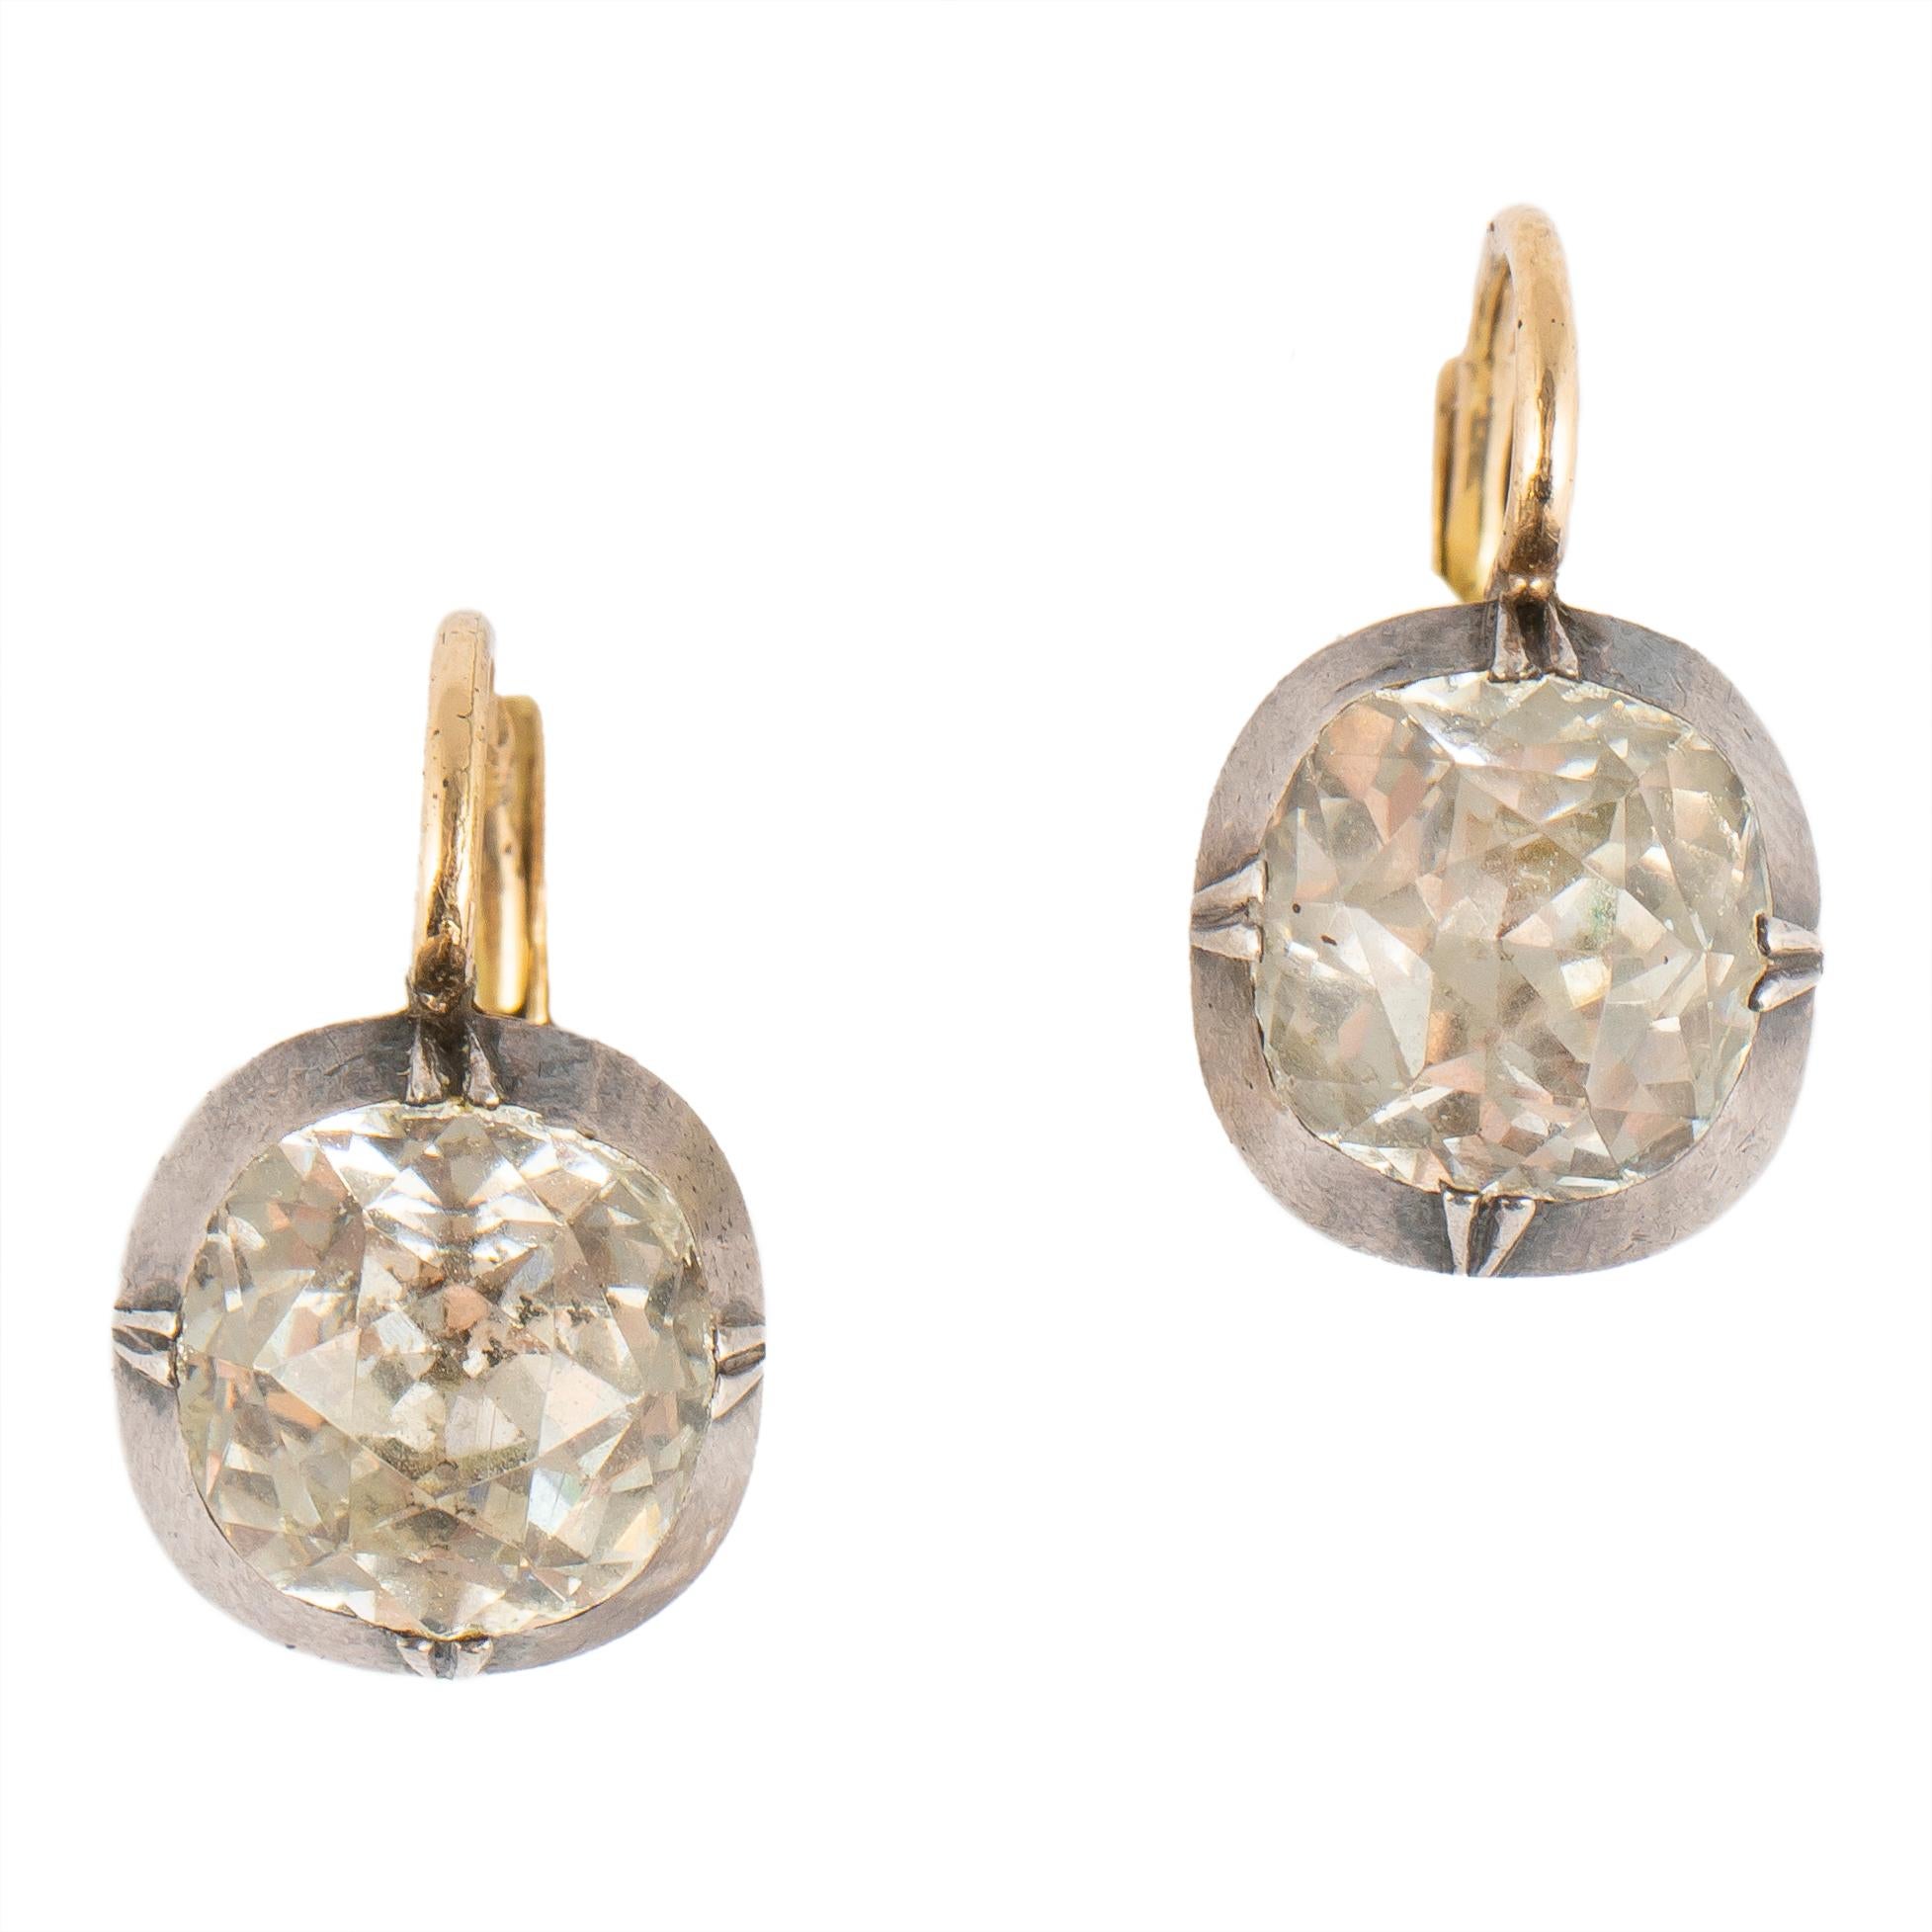 From the Romanov era, period of Tsar Nicholas II, these lovely earrings are drop shaped and bezel set with a cushion-shaped paste simulating an old diamond, mounted in silver and gold. Made in the Imperial capital of Russia before the 1917